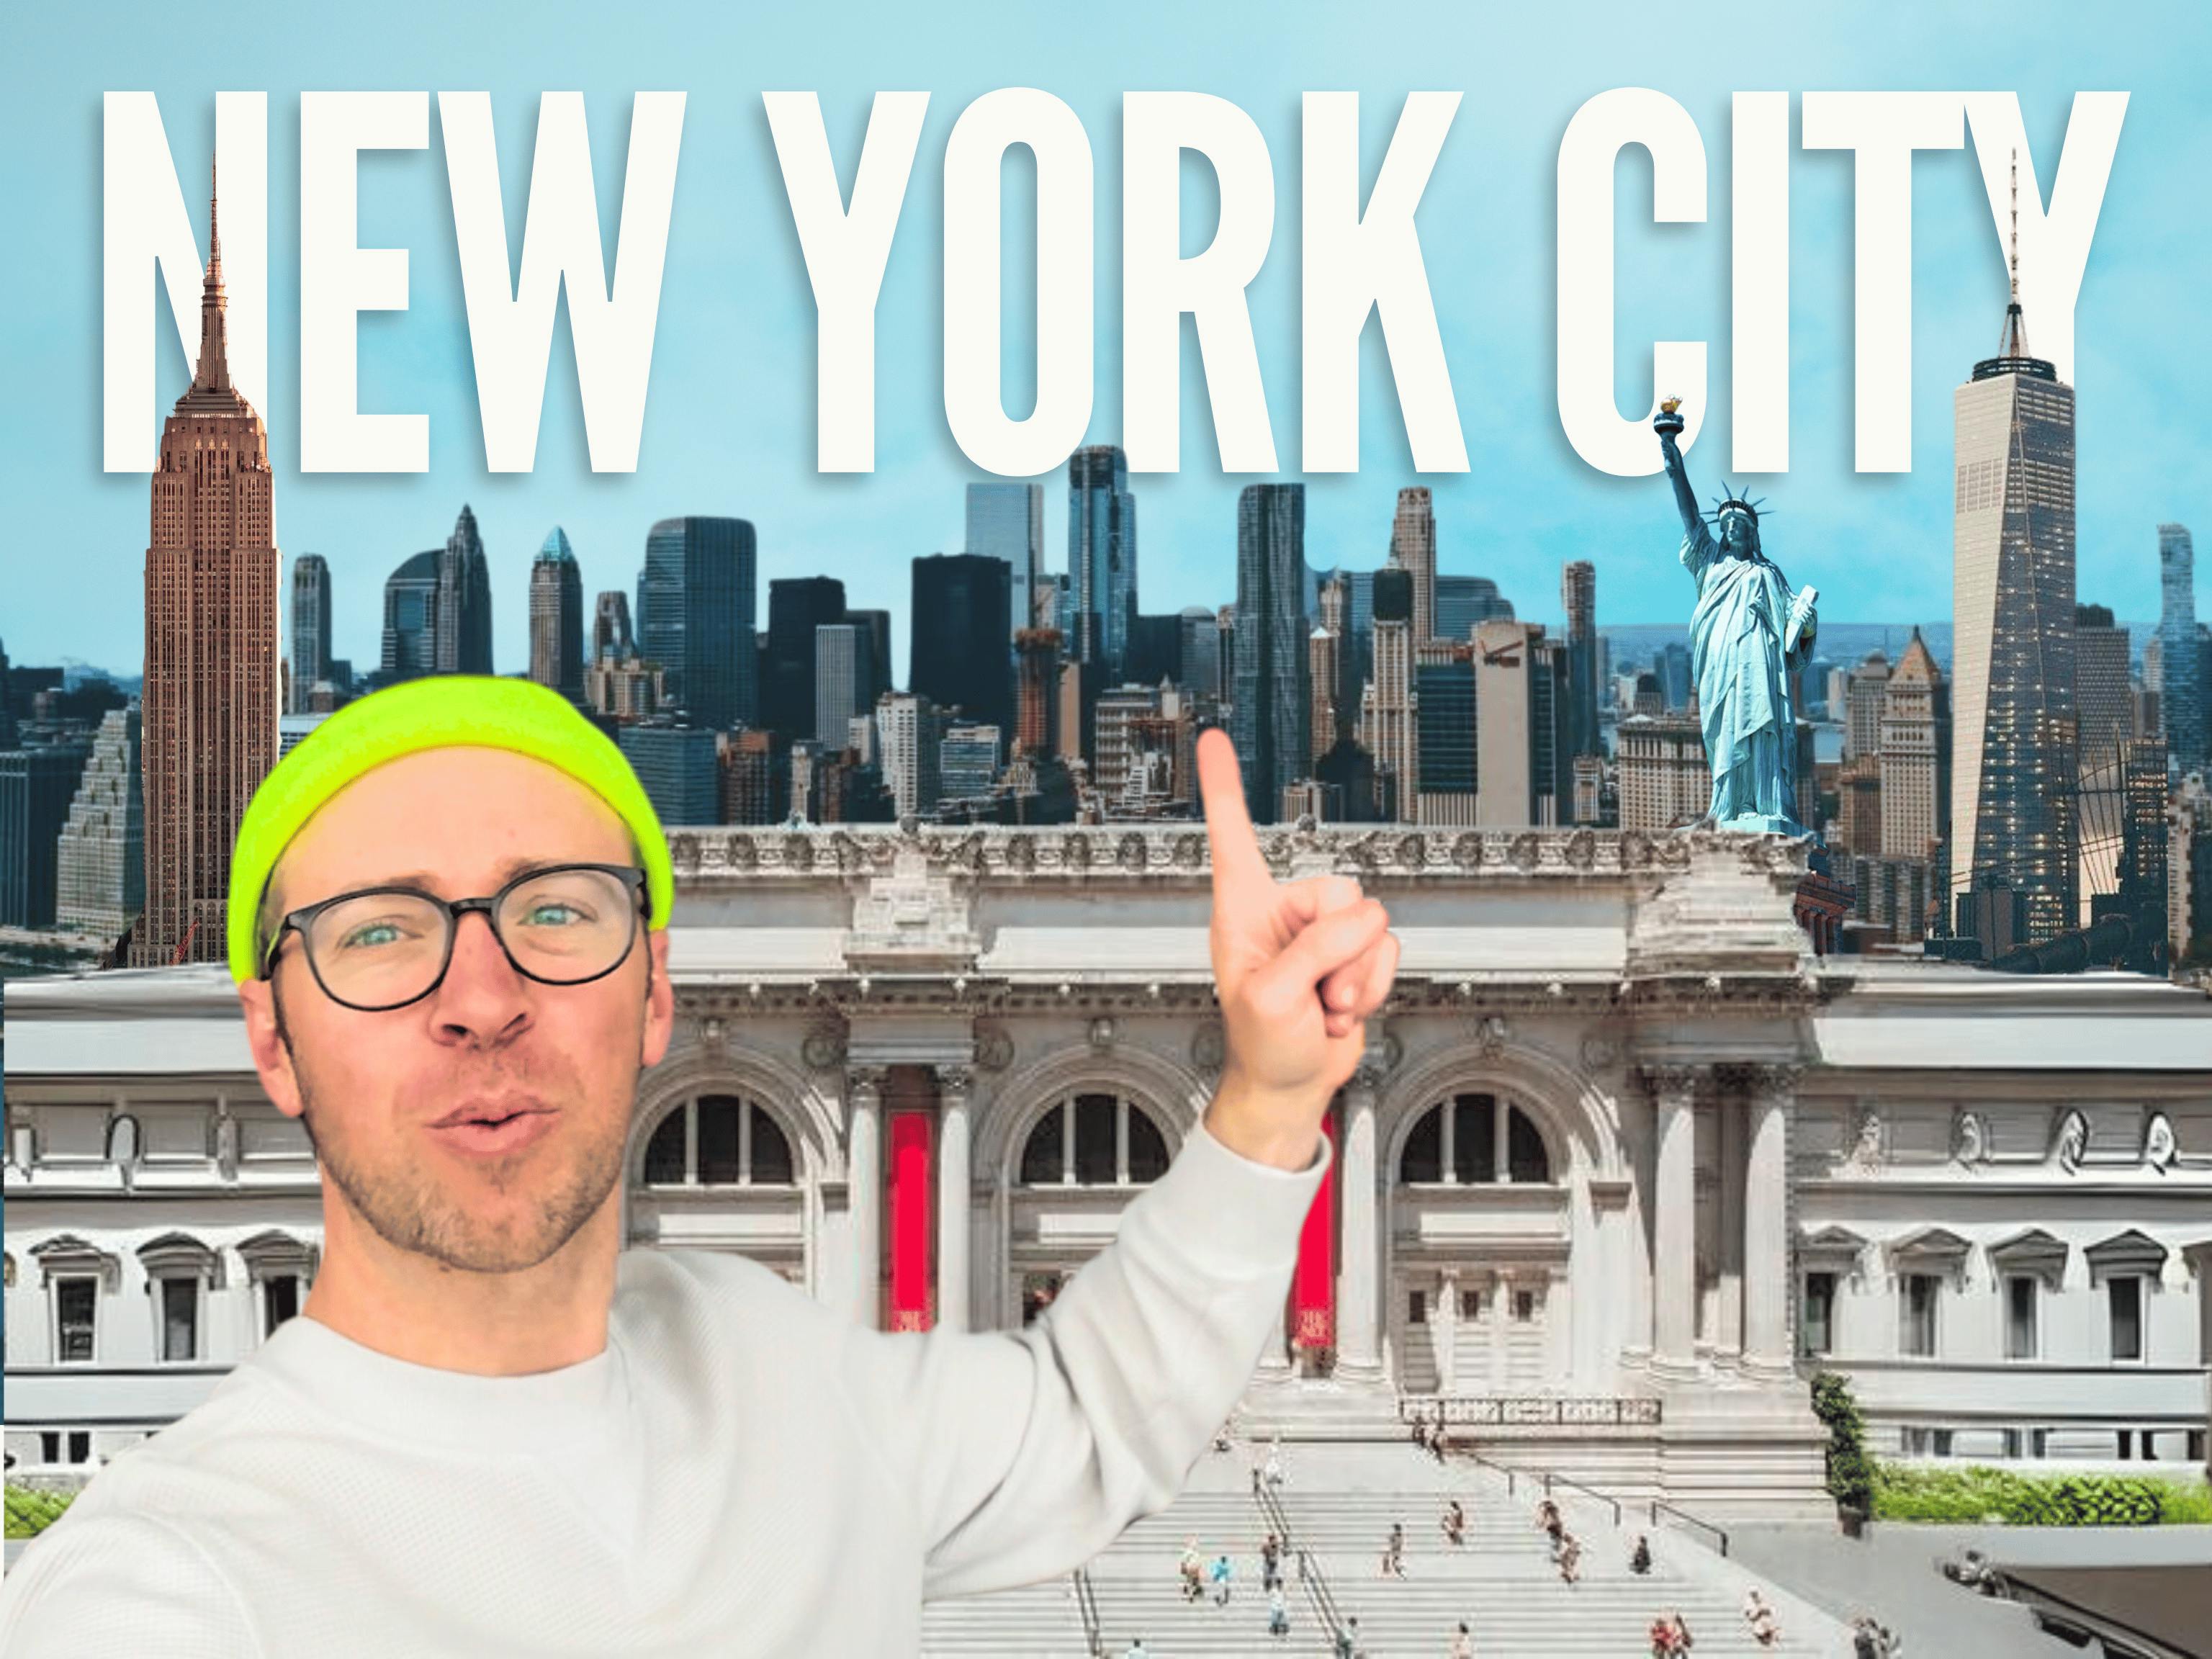 Header text: New York City, new york city skyline with the famous buildings and headshot of Nick Gray